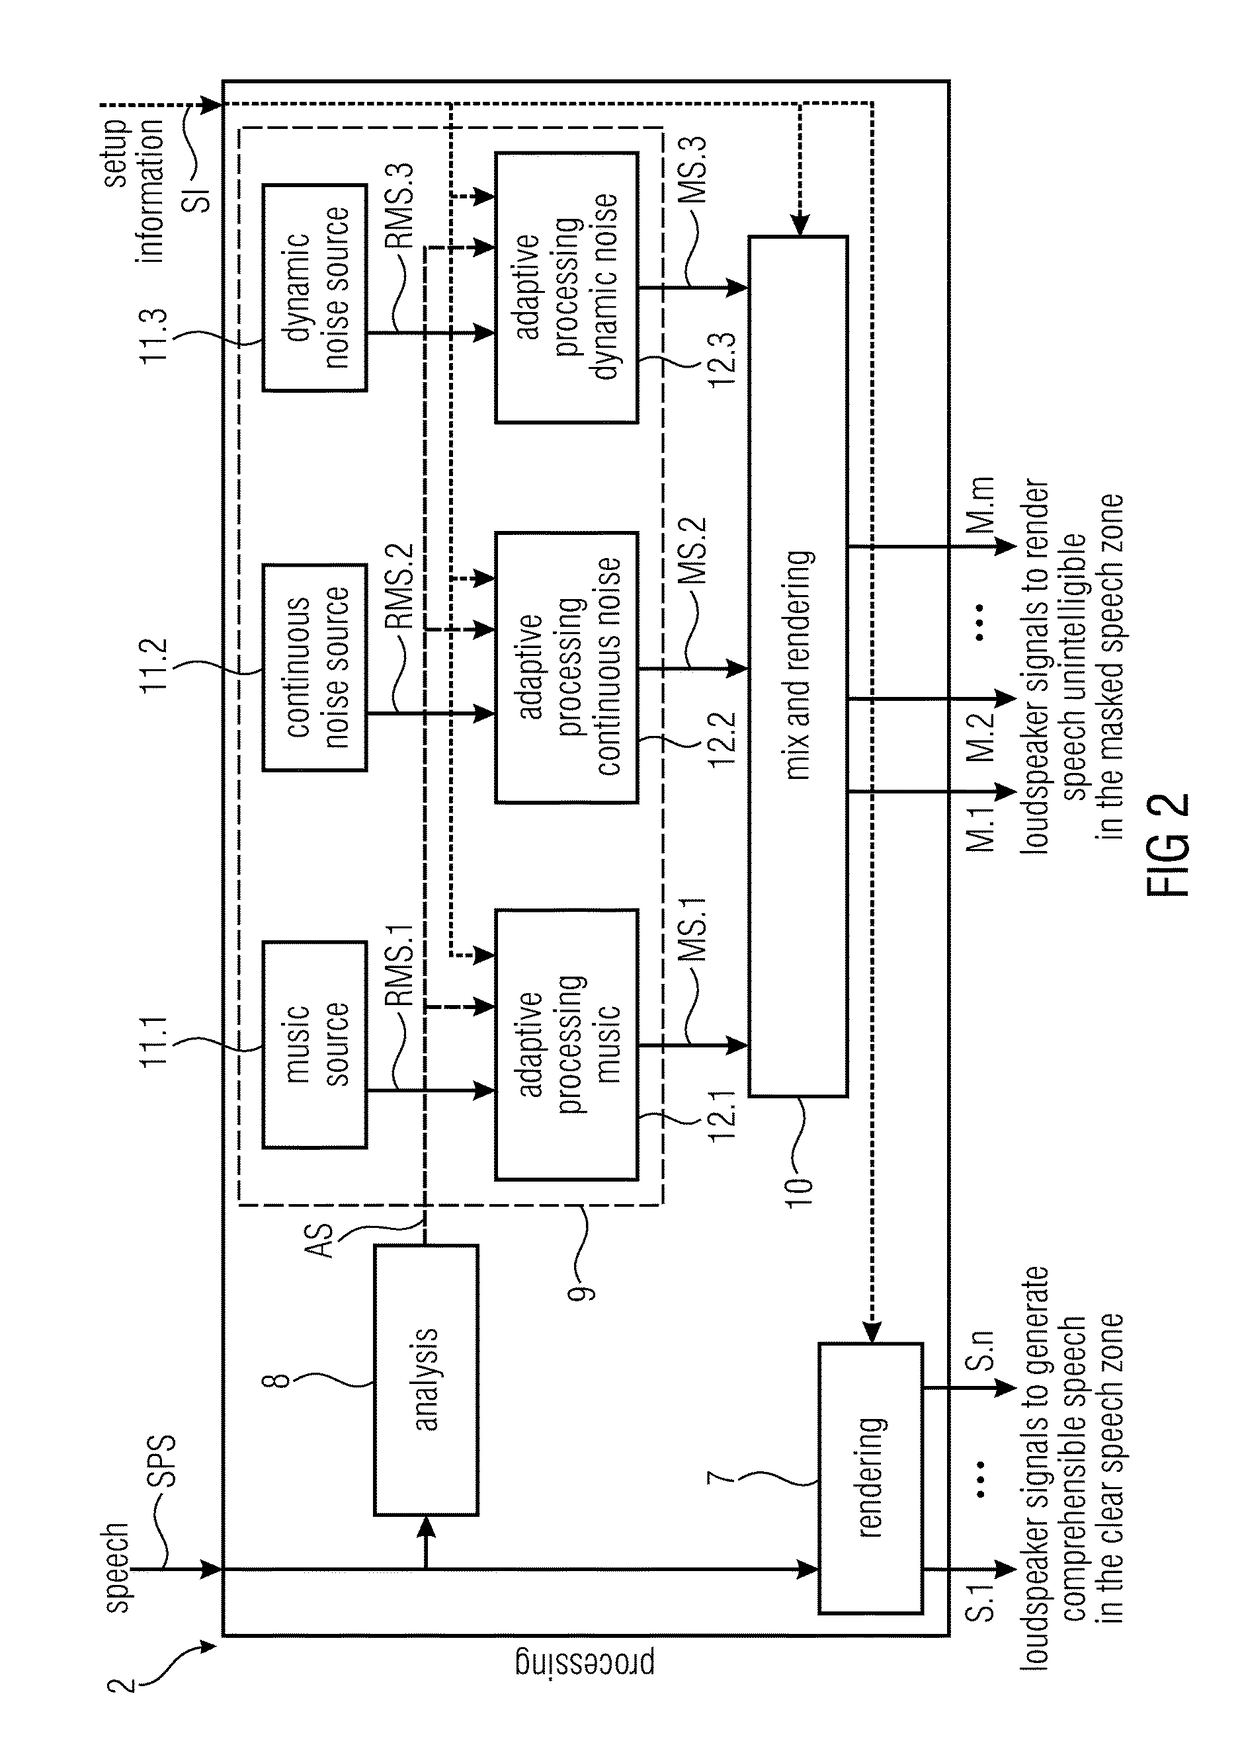 Speech reproduction device configured for masking reproduced speech in a masked speech zone